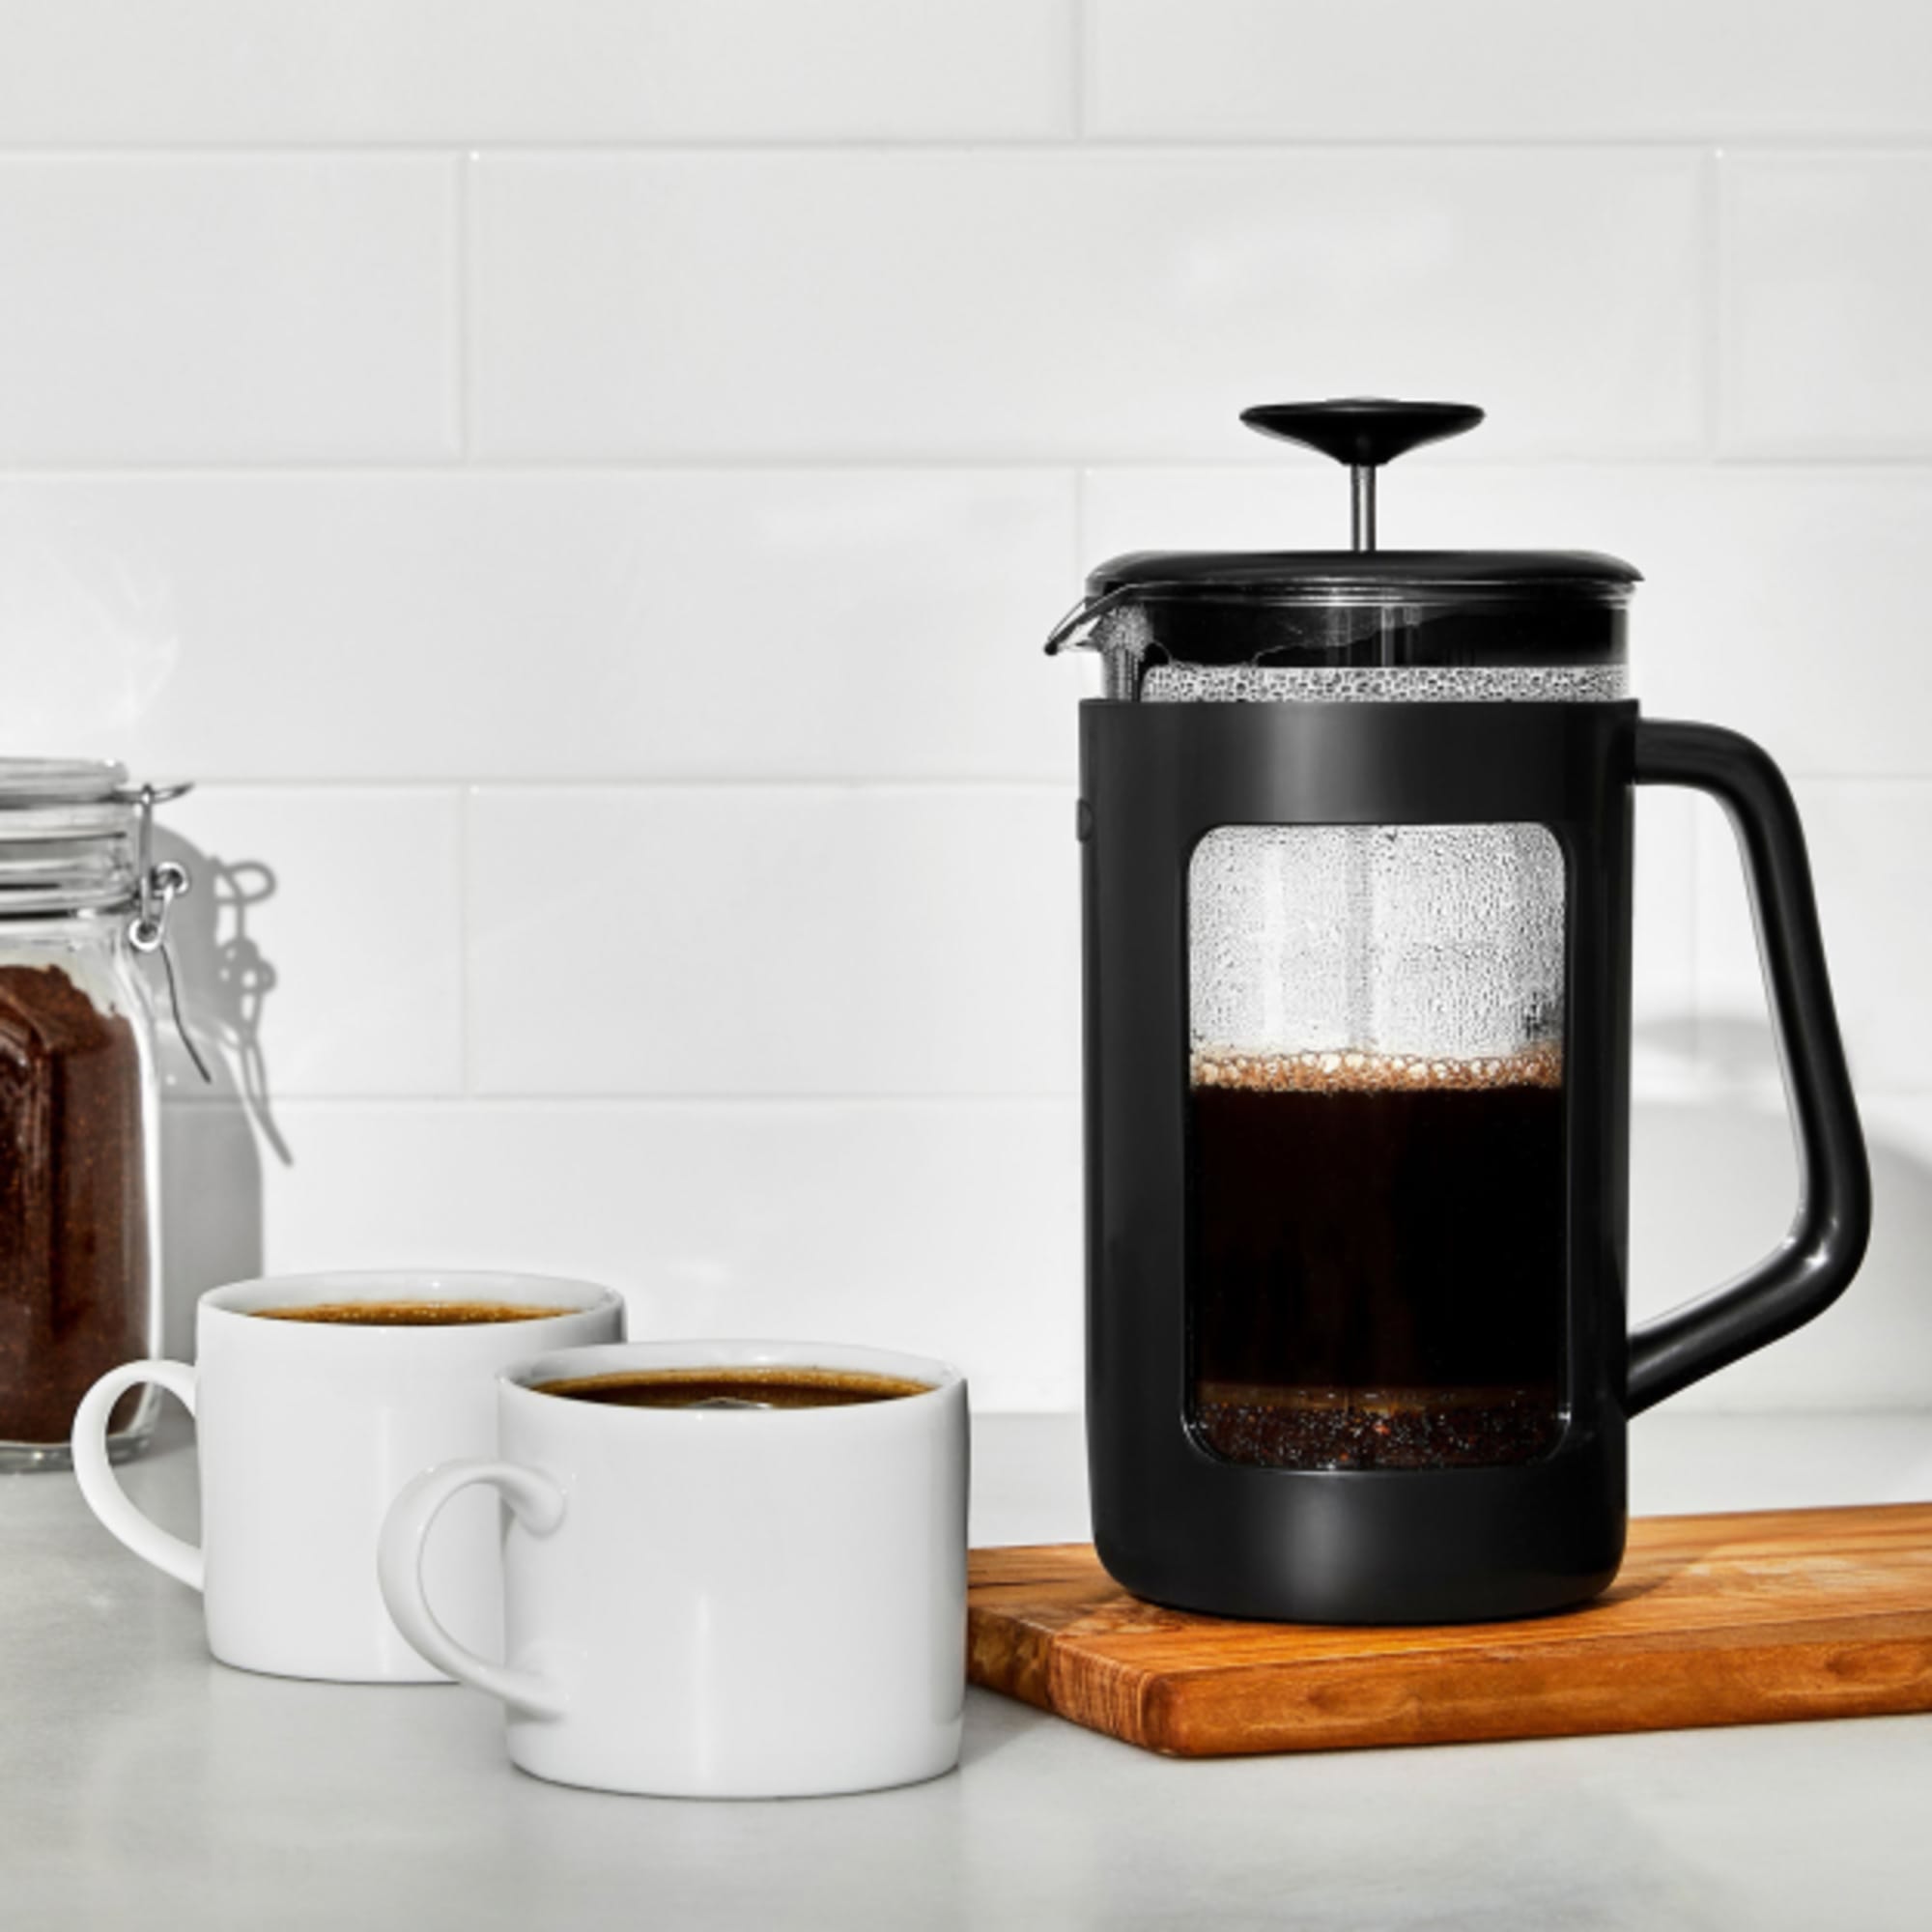 https://res.cloudinary.com/kitchenwarehouse/image/upload/c_fill,g_face,w_625/f_auto/t_PDP_2000x2000/Supplier%20Images%20/2000px/OXO-Good-Grips-Venture-French-Press-8-Cup_6_2000px.jpg?imagetype=pdp_gallery